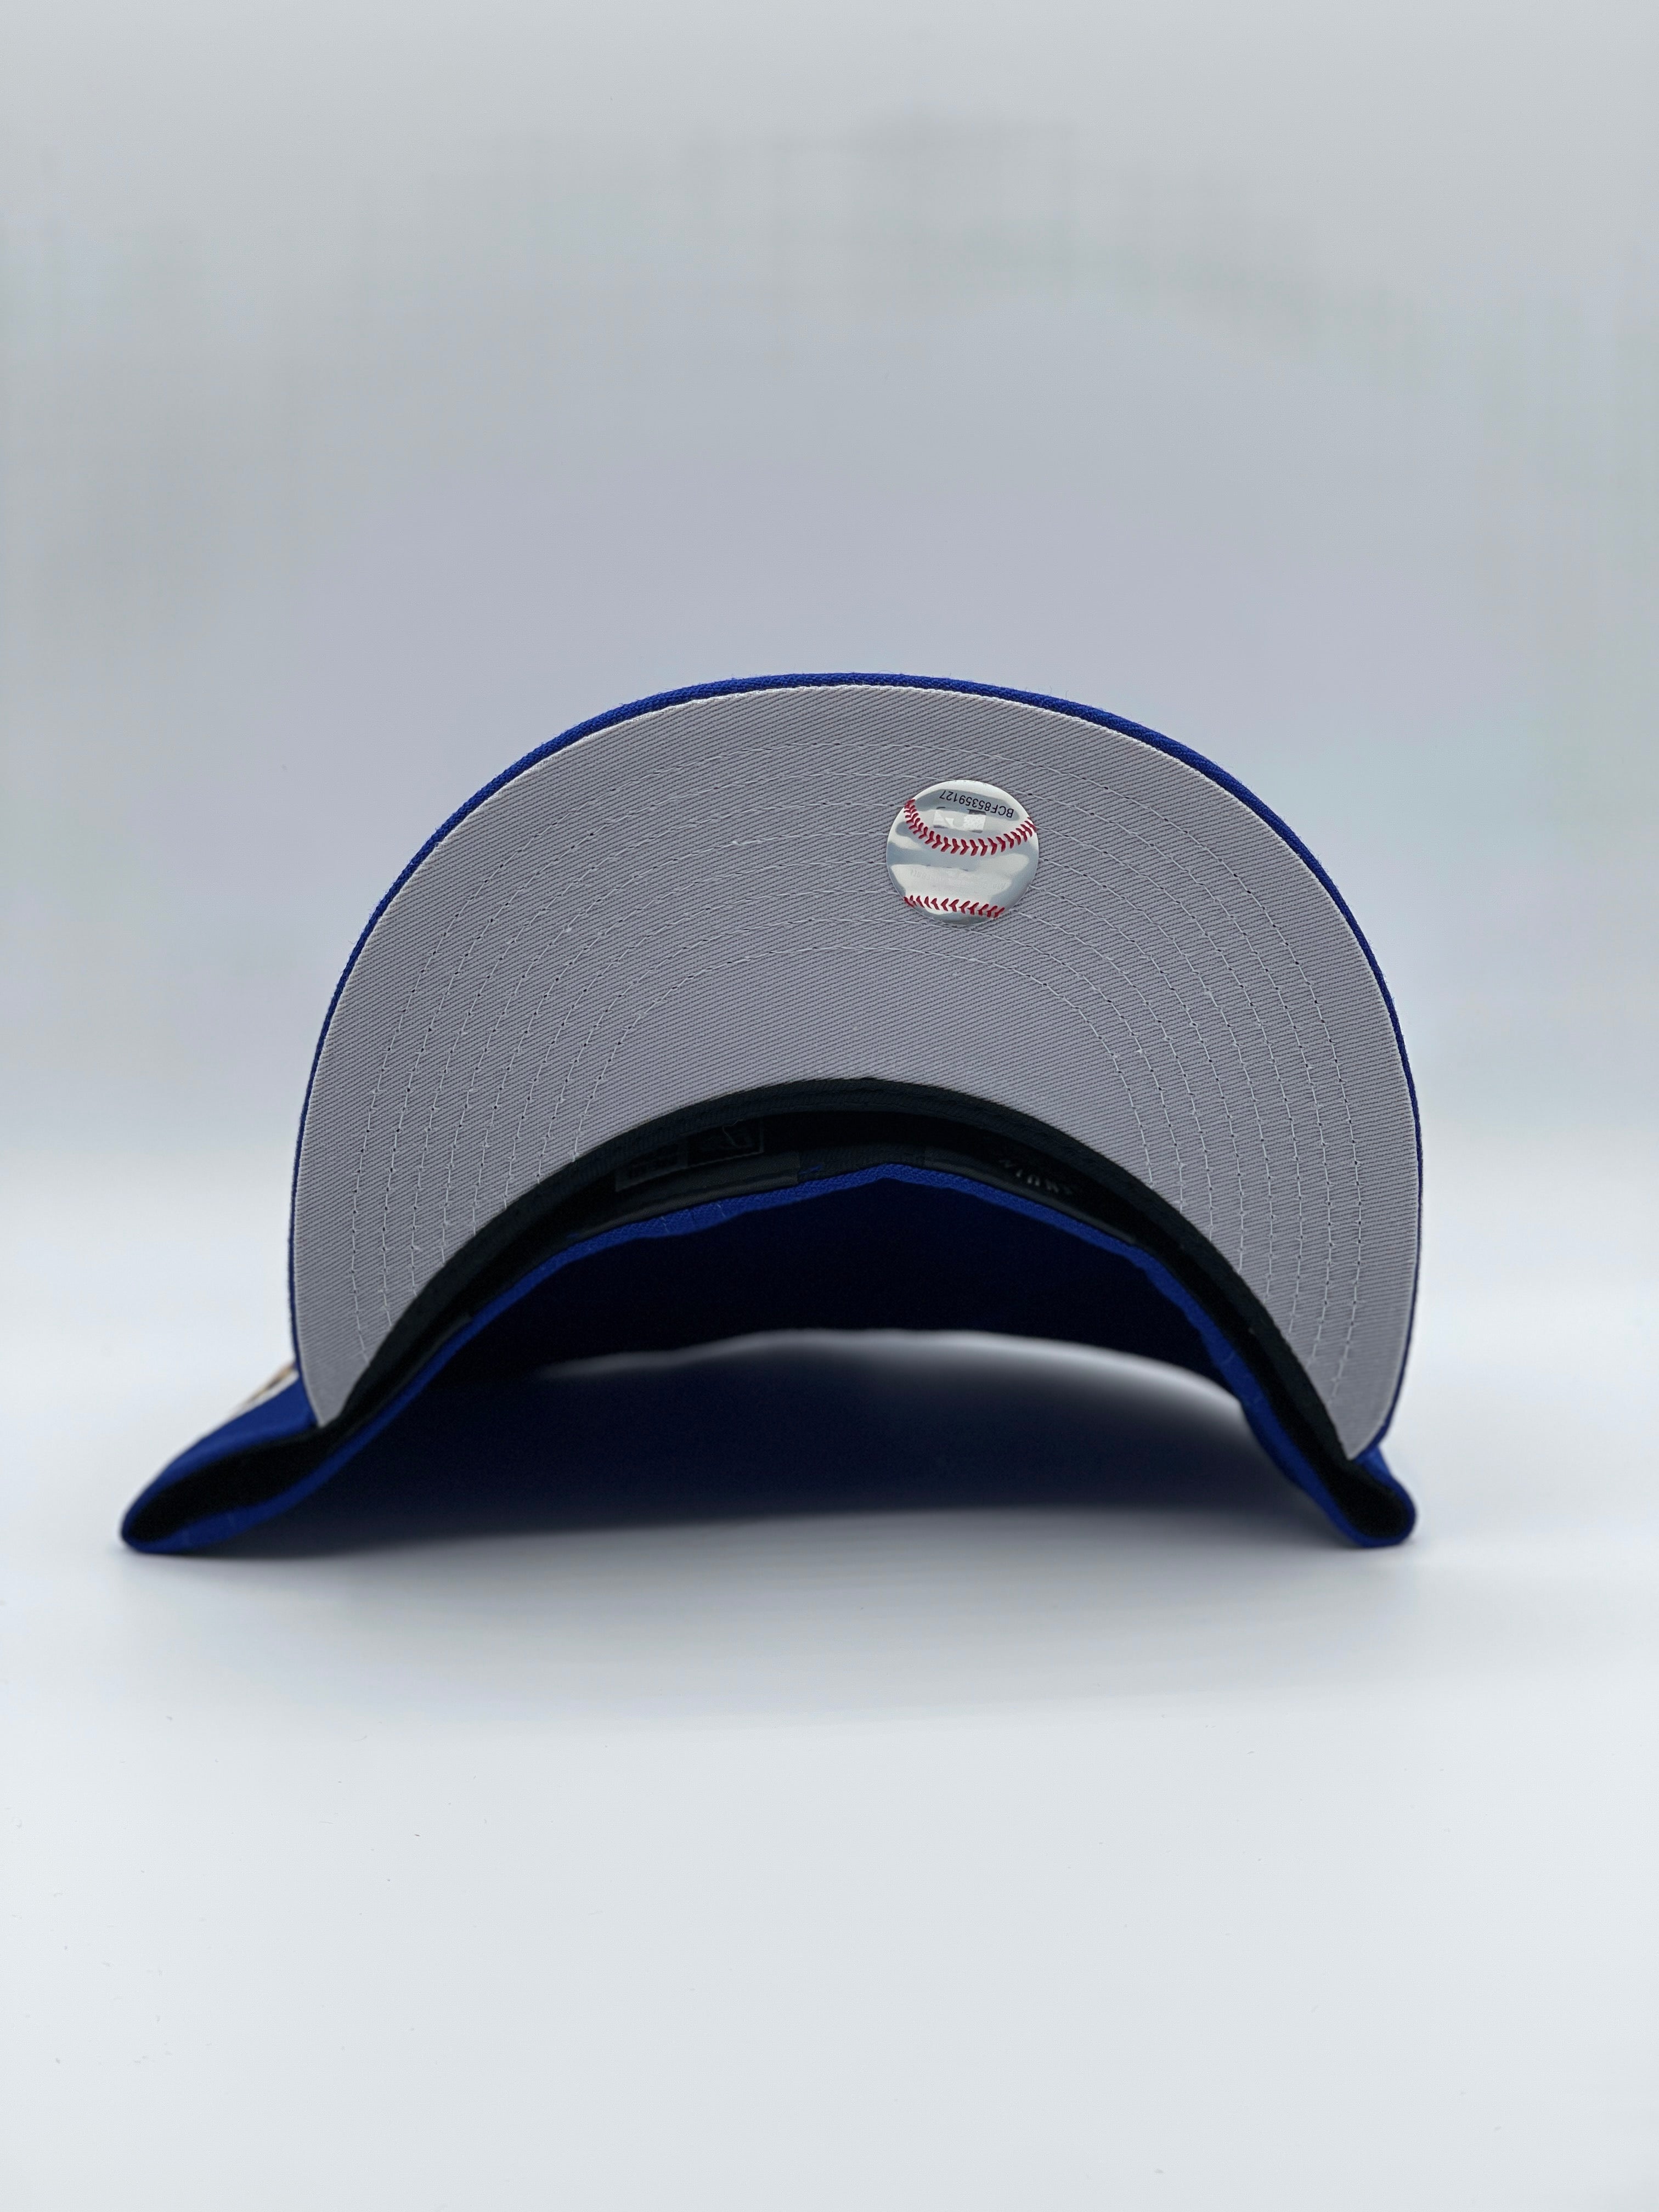 CHICAGO CUBS x CHAMPIONSHIPS 59FIFTY NEW ERA (GREY UV)